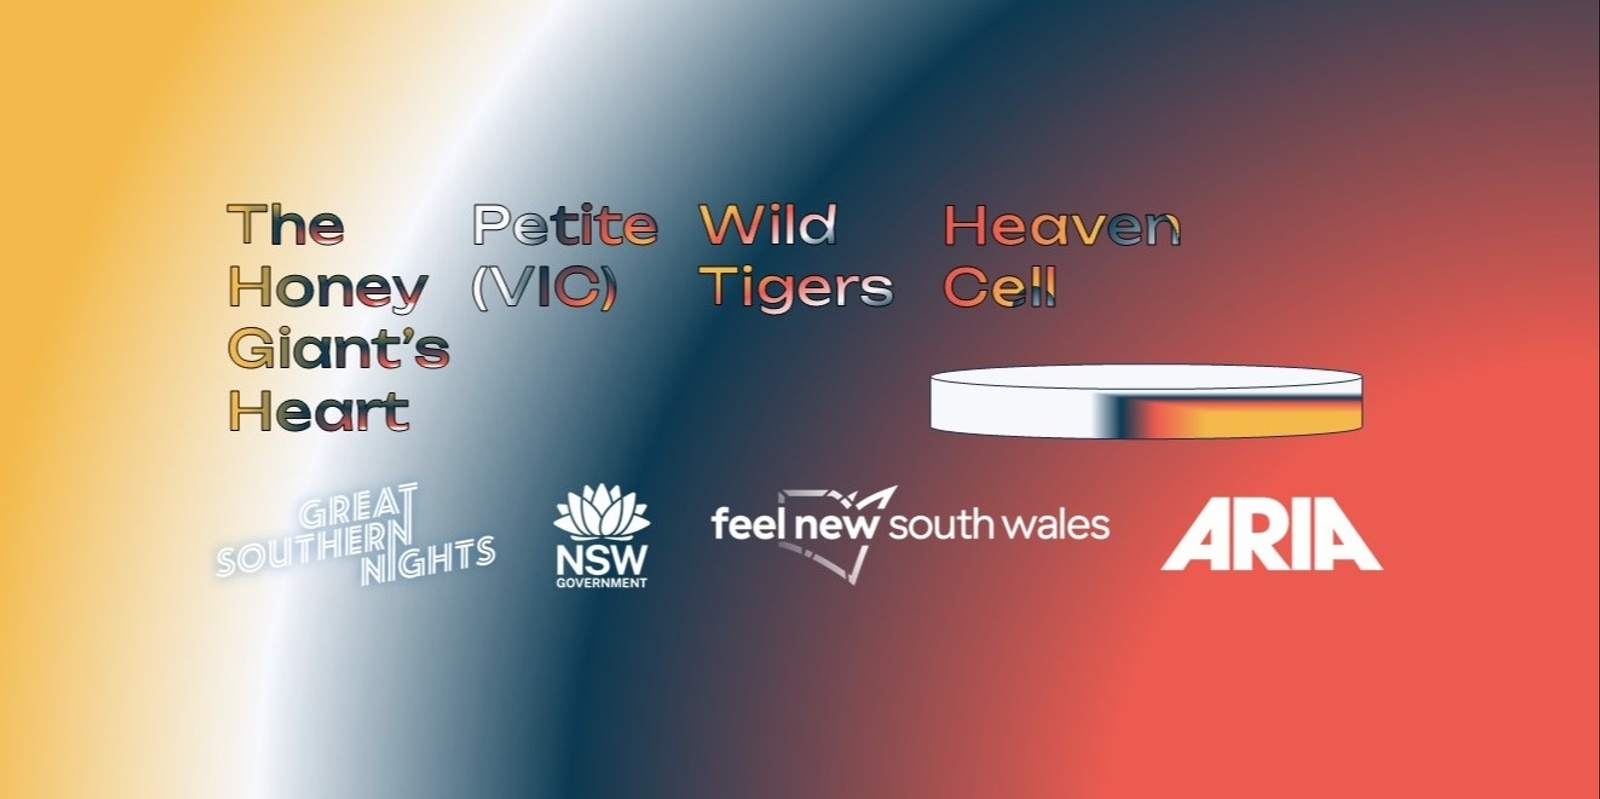 Banner image for Great Southern Nights presents...The Honey Giant's Heart, Petite (VIC), Wild Tigers, Heaven Cell